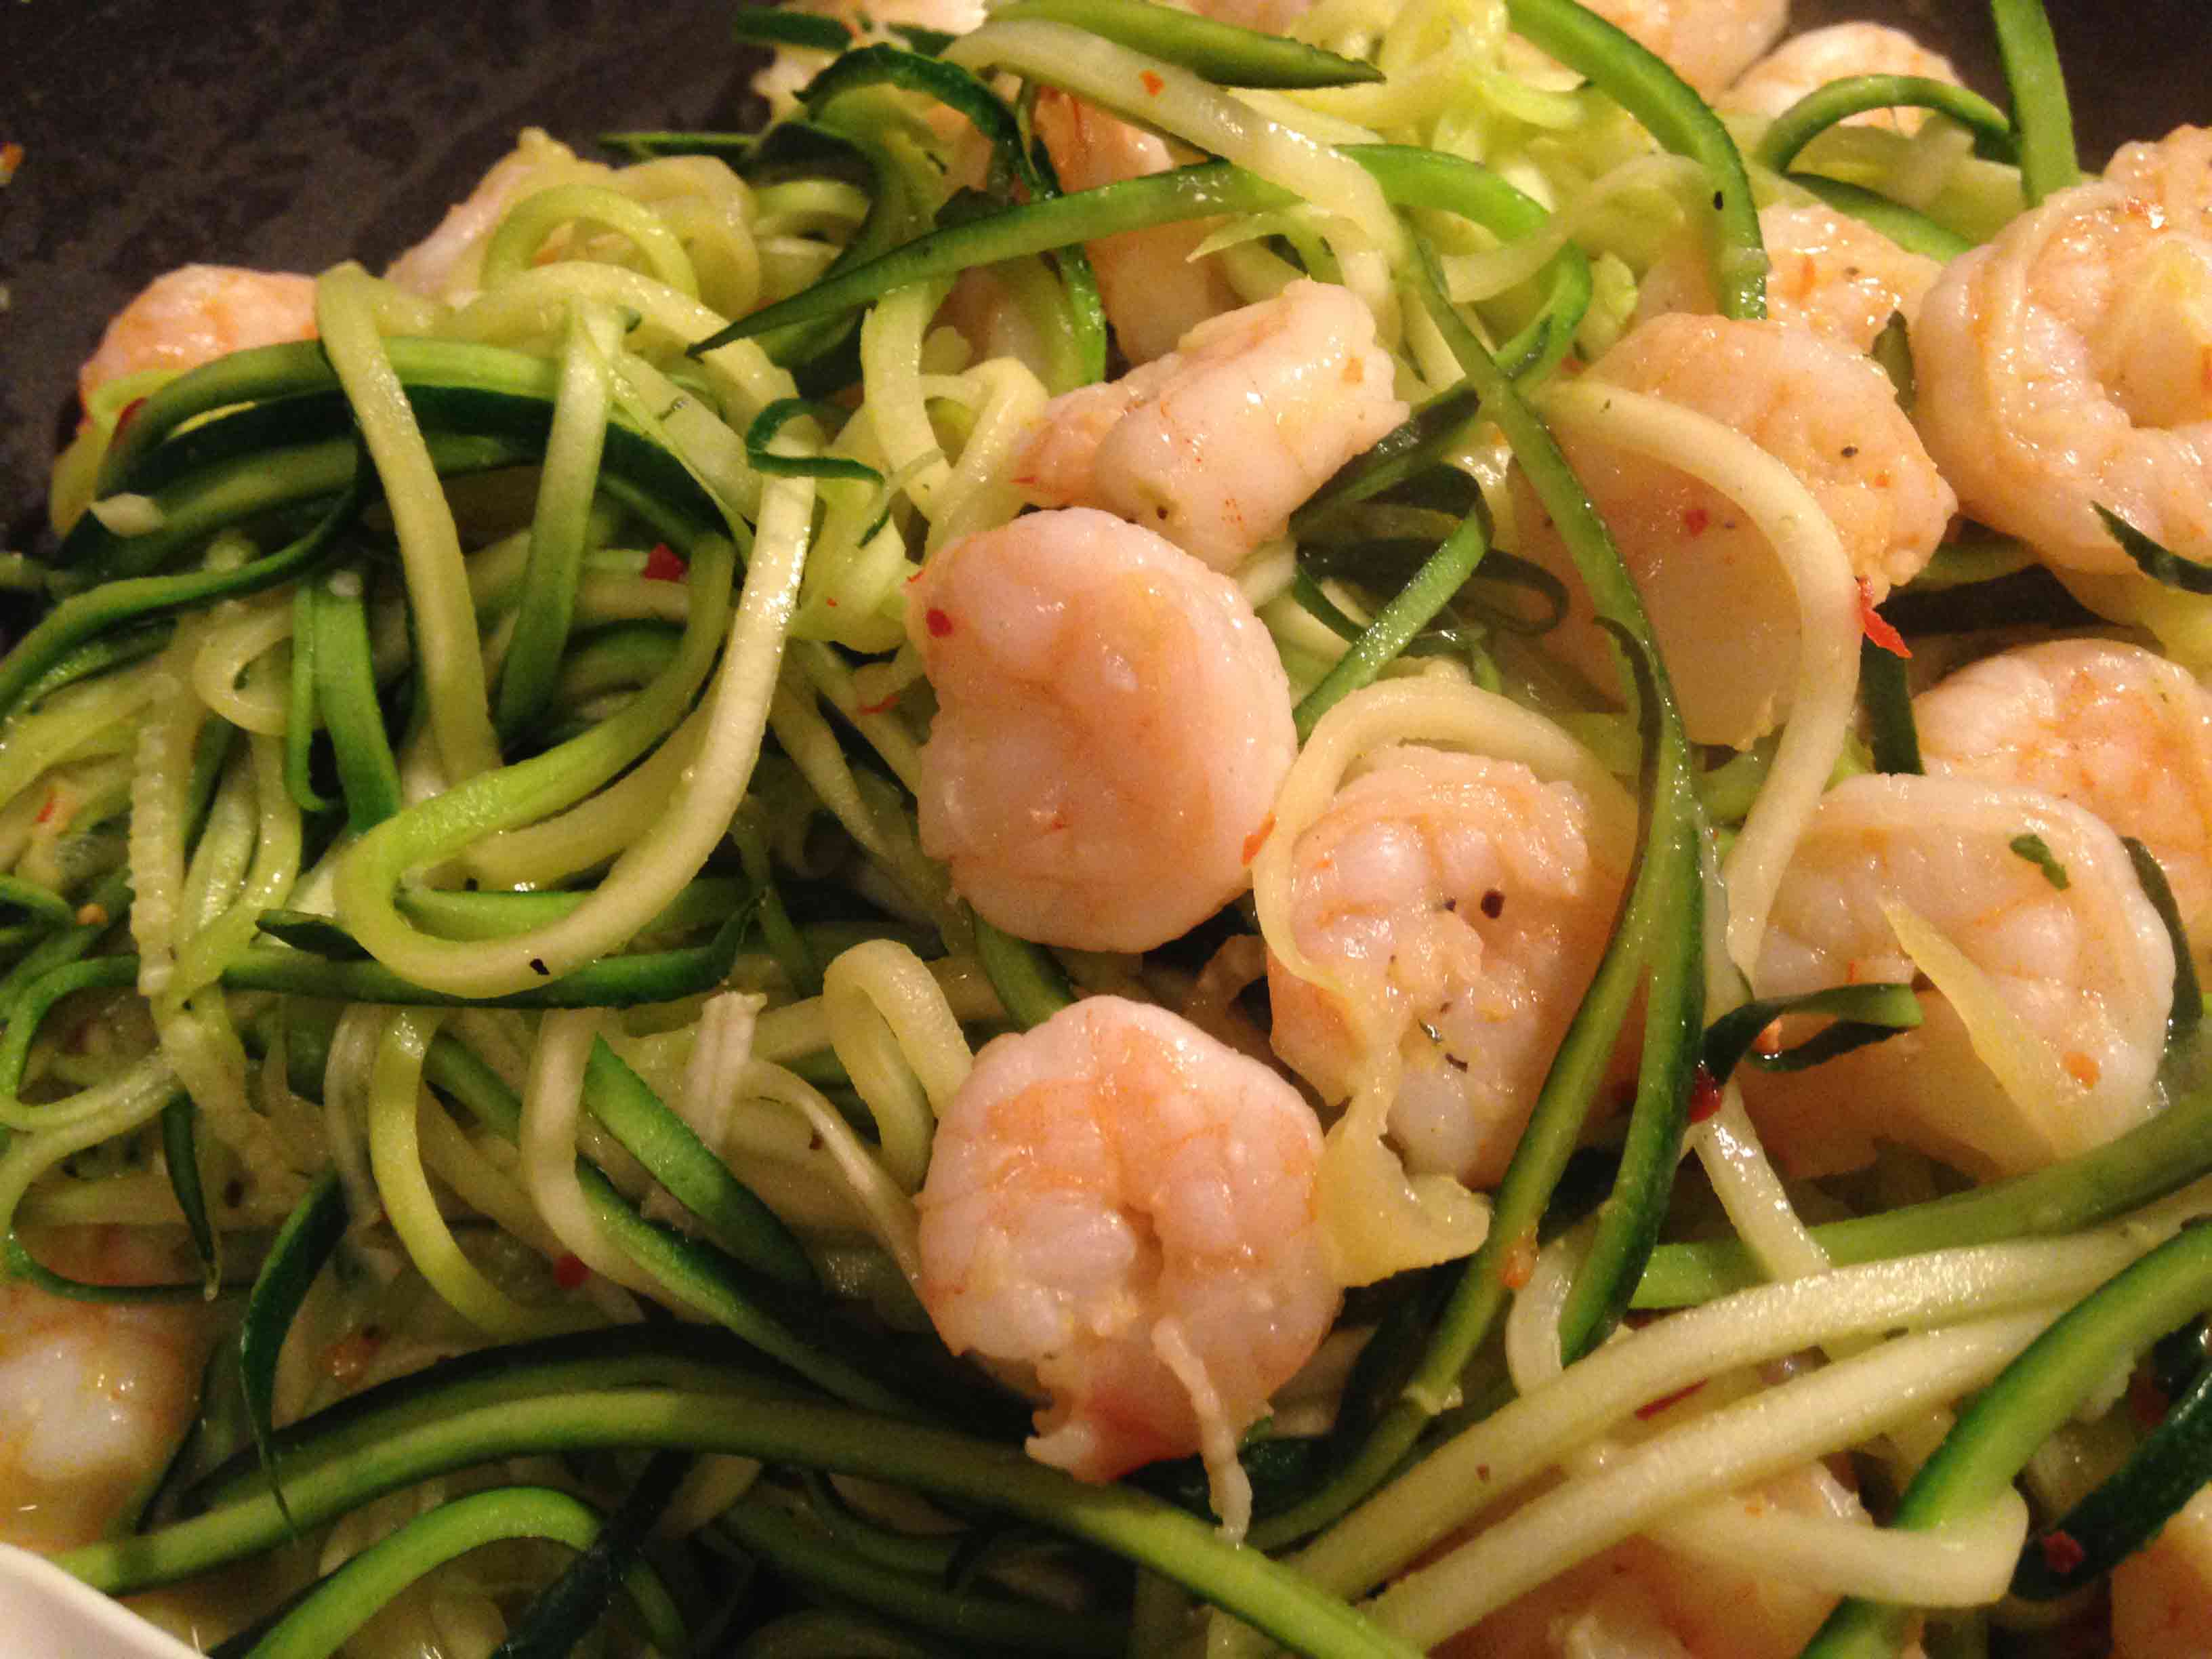 Shrimp Scampi with Zucchini Noodles. Low carb and bariatric weight loss surgery recipes at www.foodcoach.me